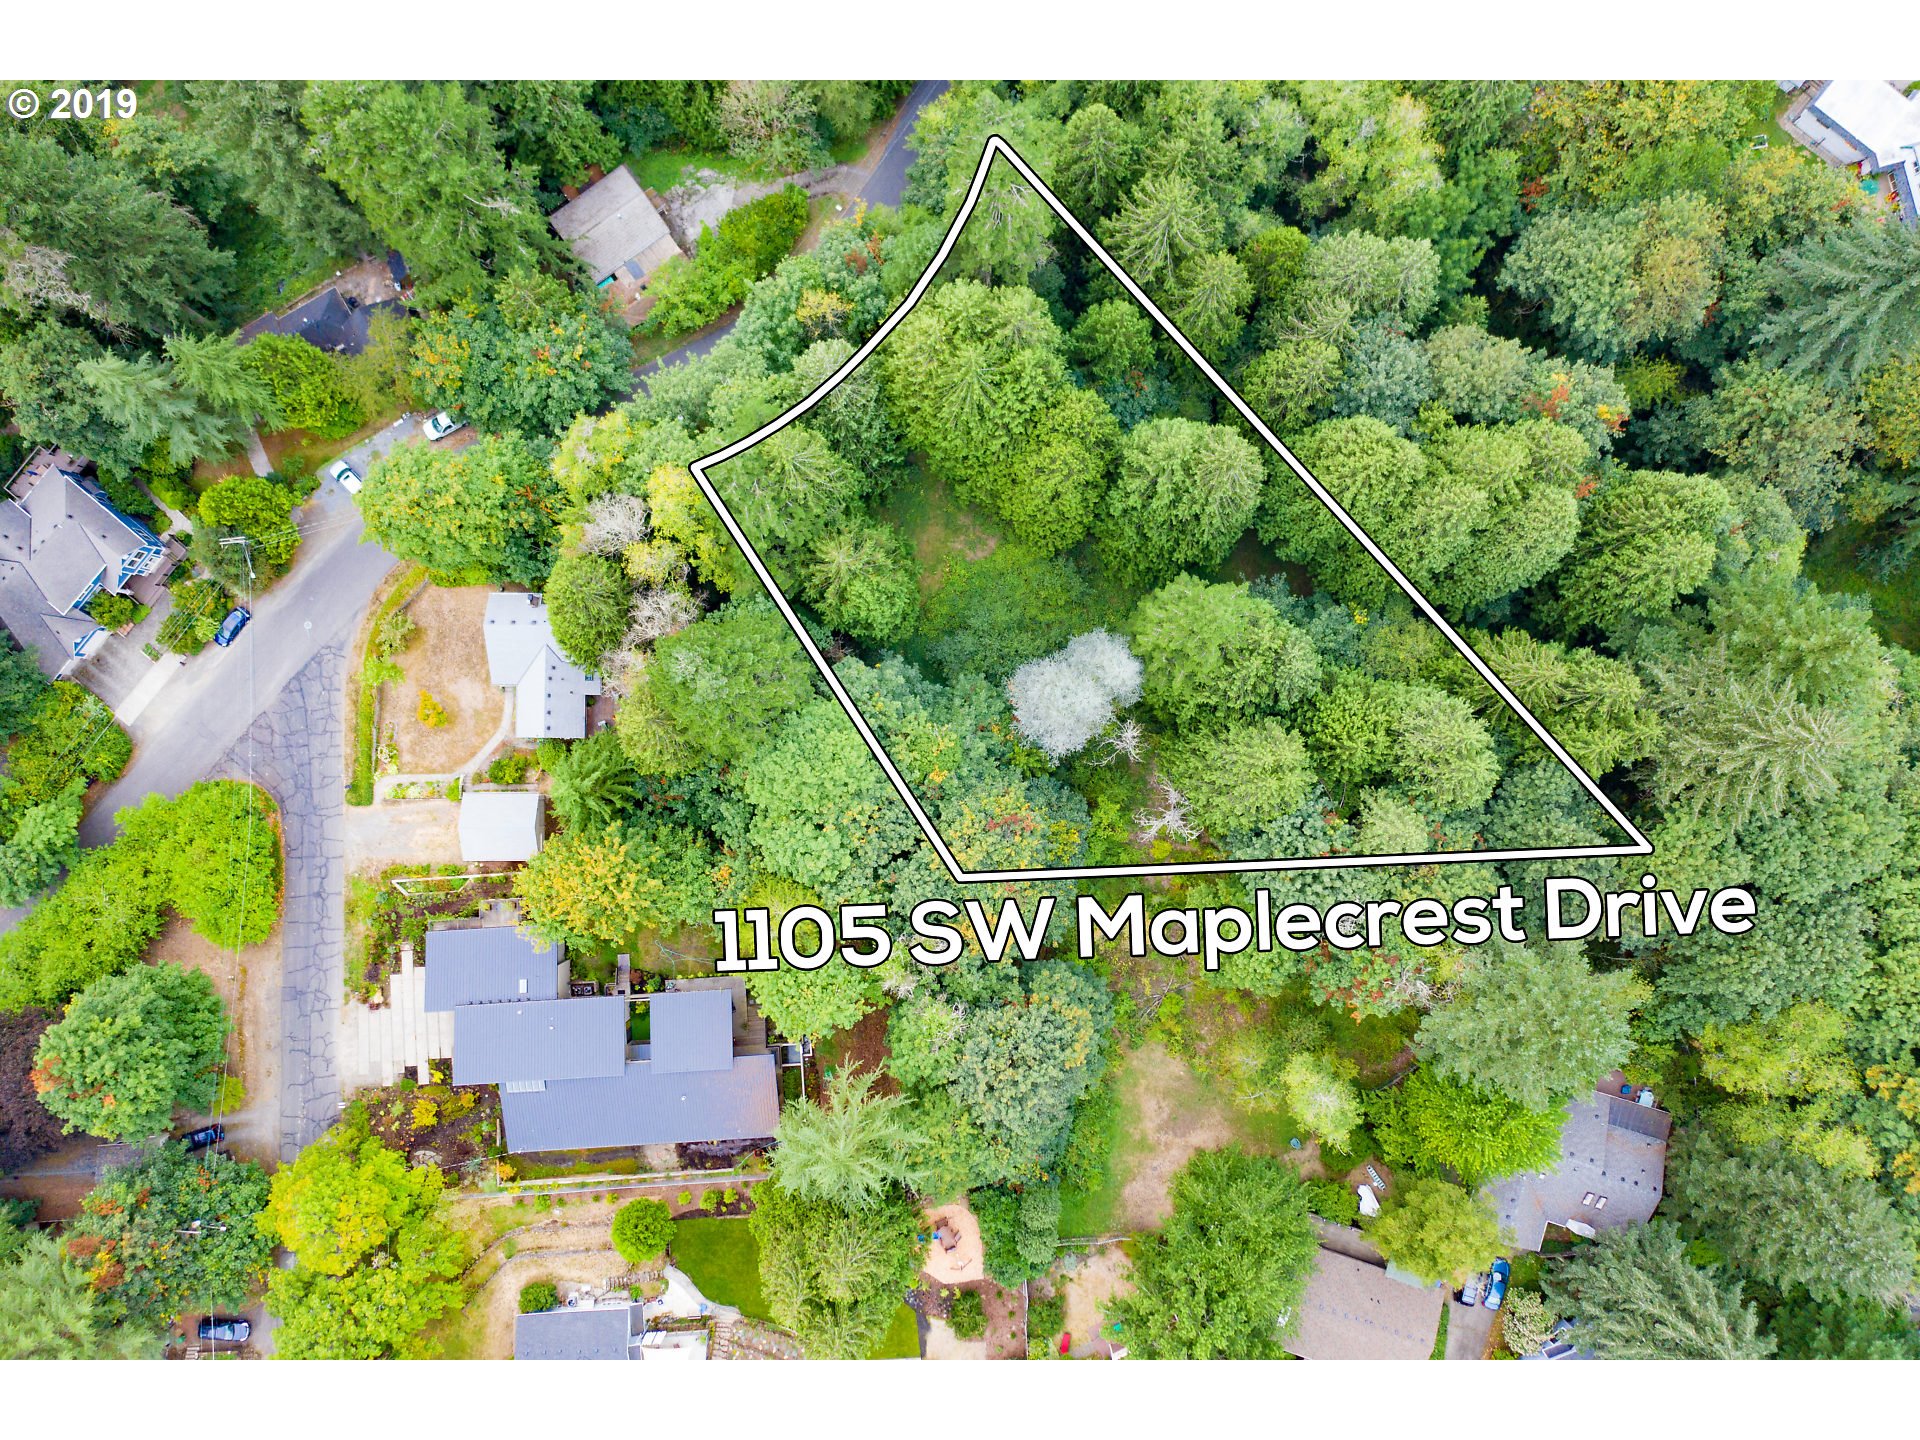 1105 SW MAPLECREST DR (1 of 9)